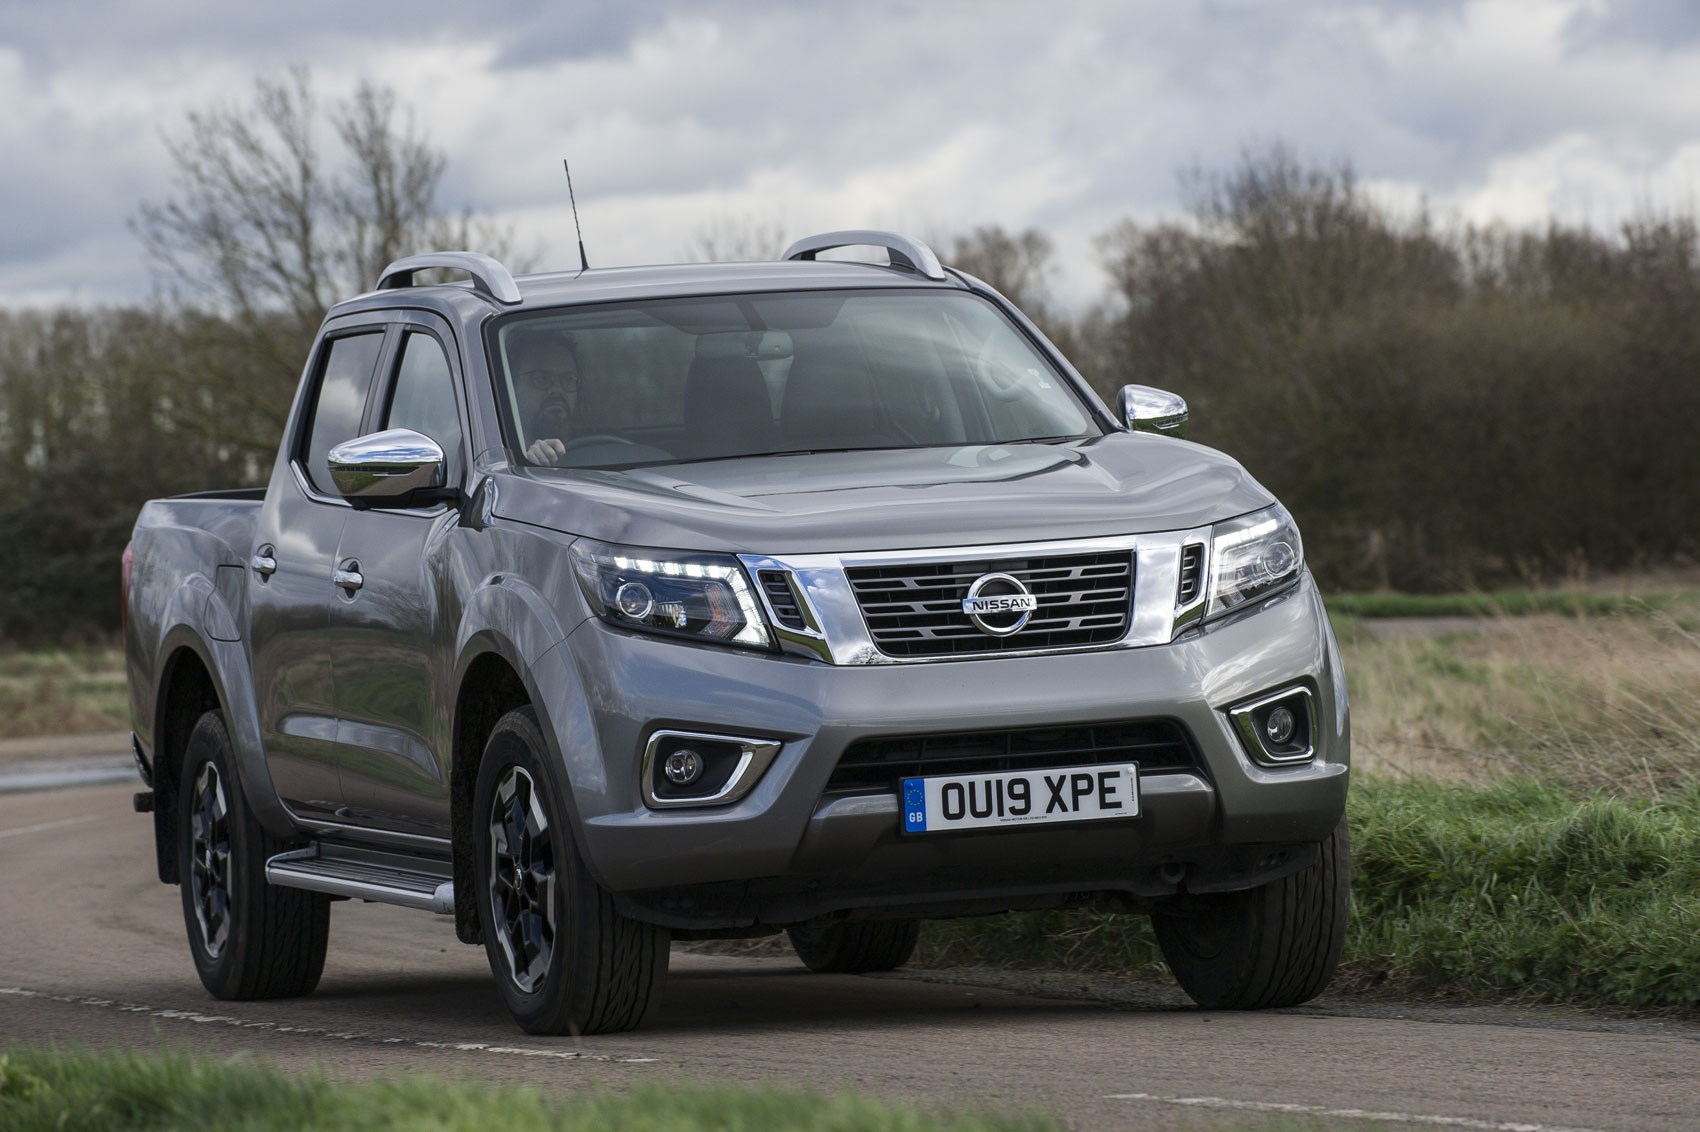 Nissan Navara review, 2019 update model, front view, driving